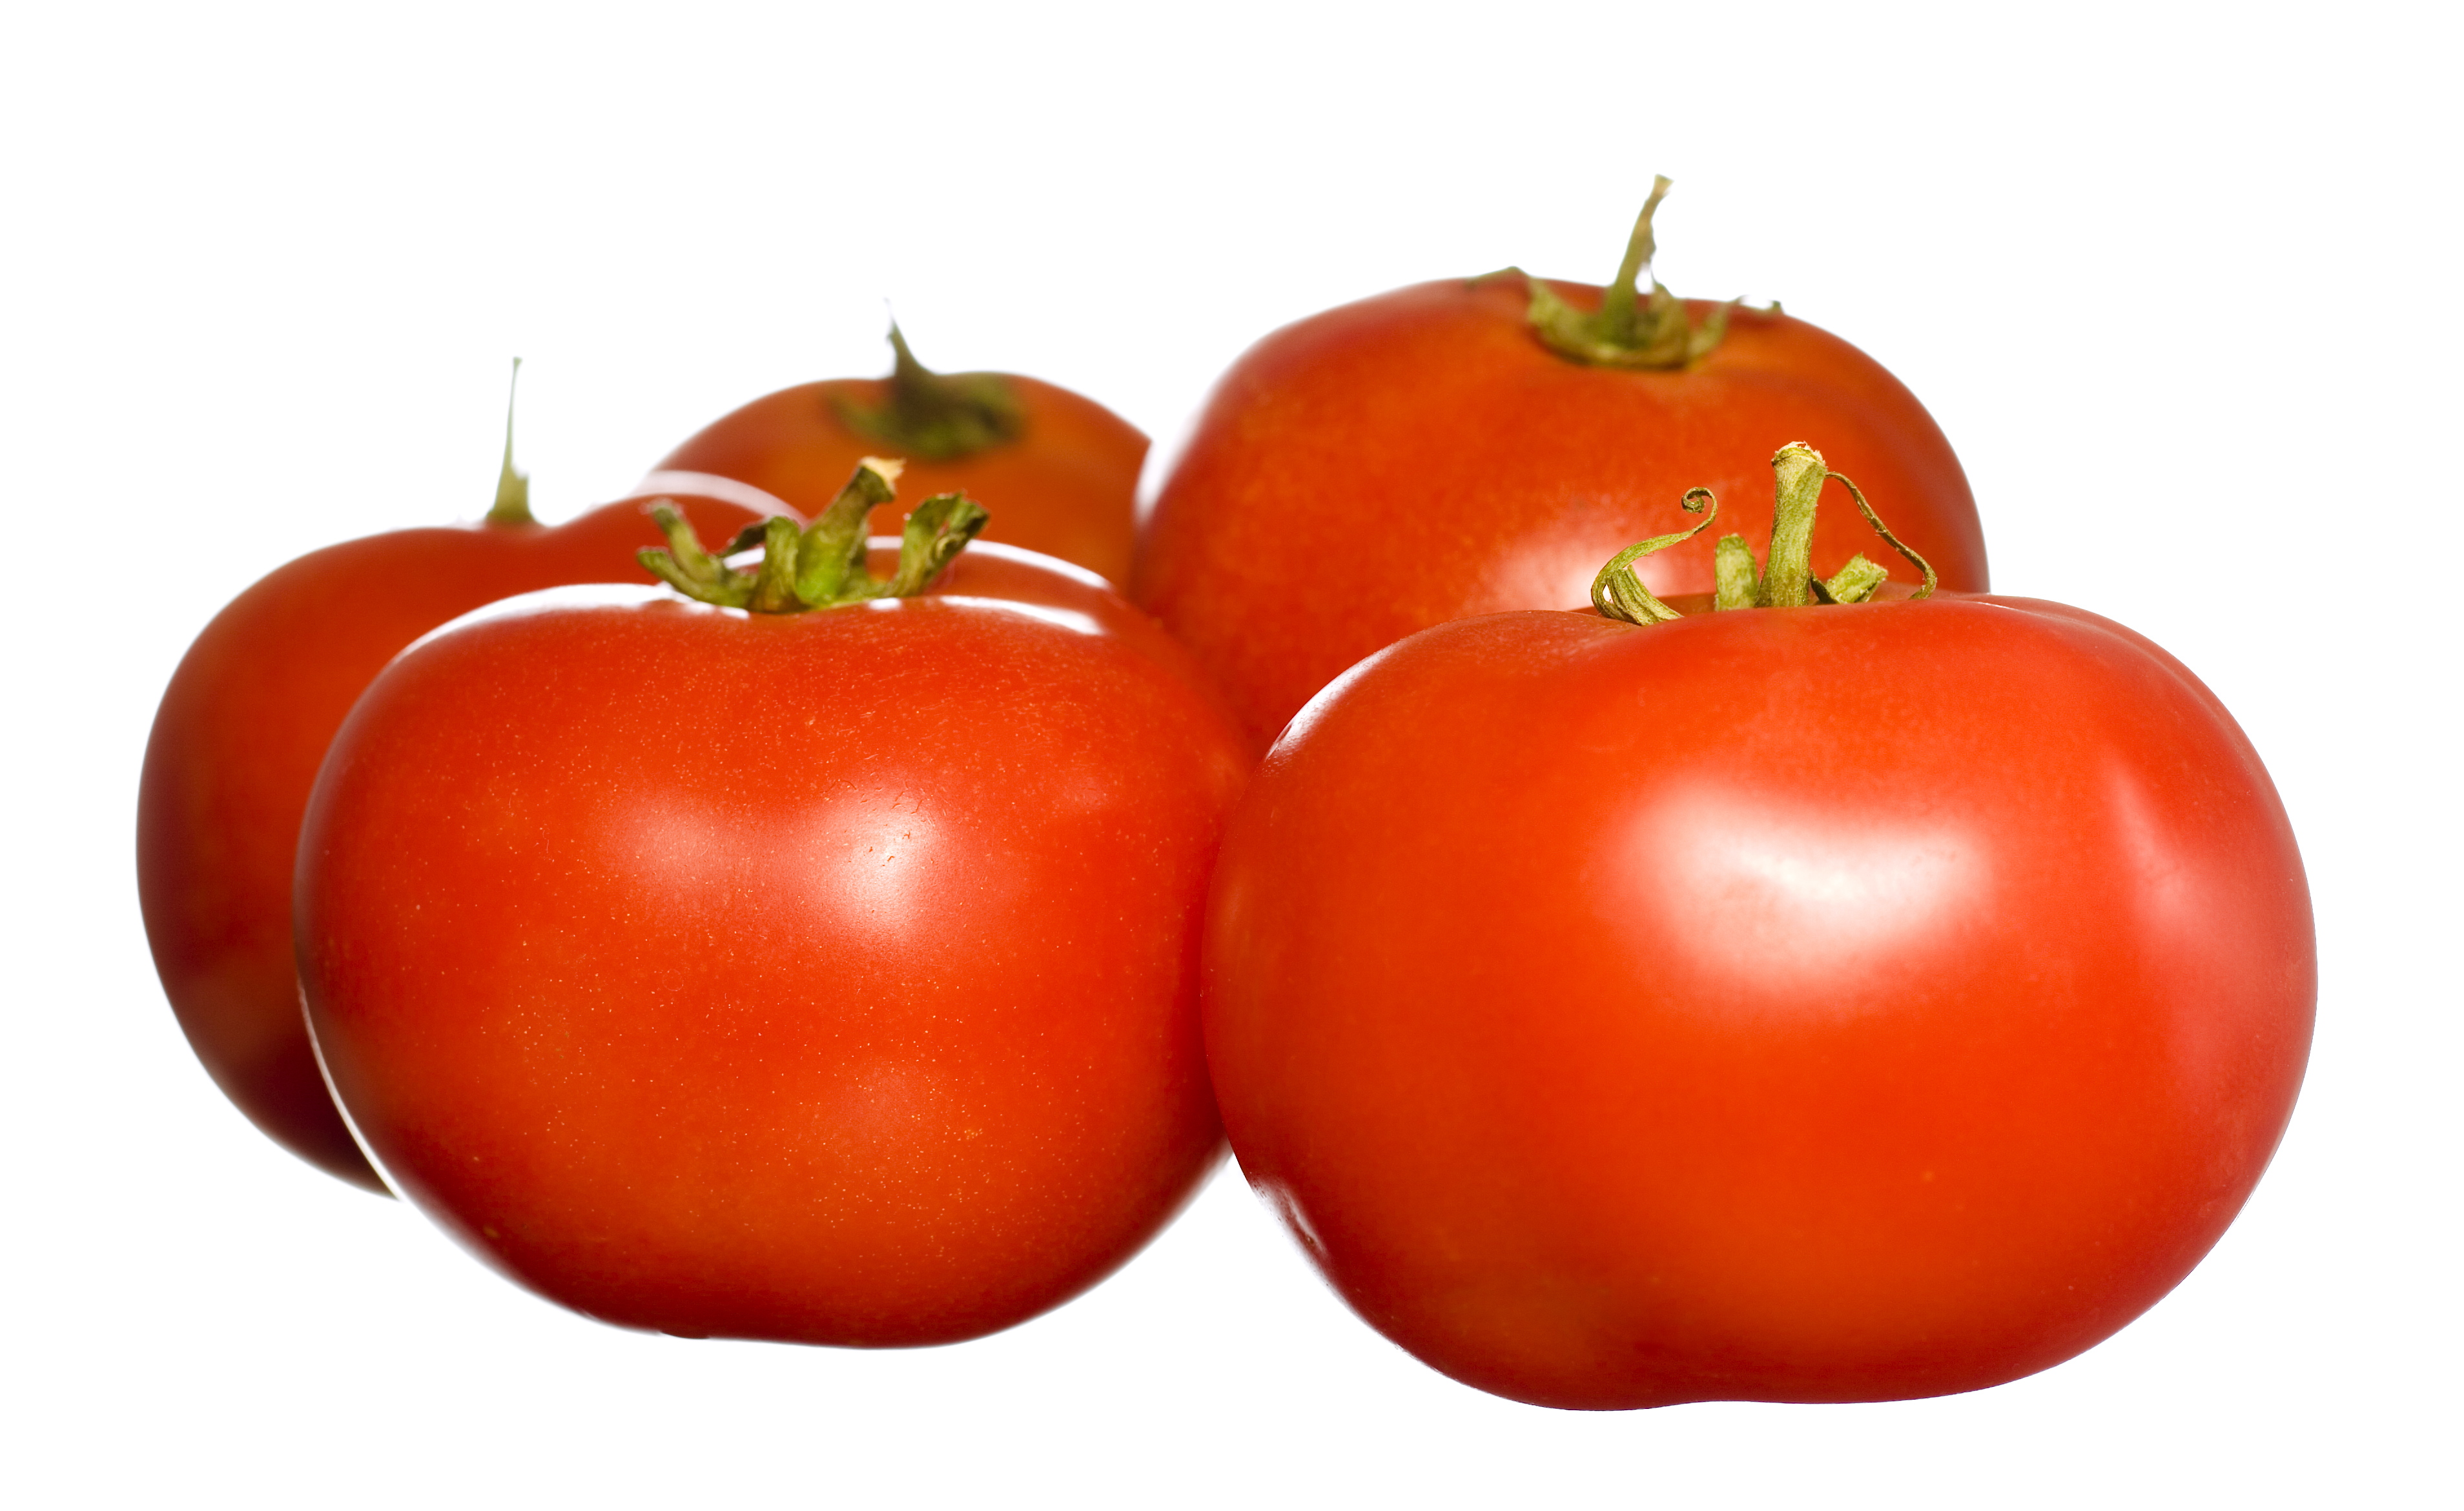 tomatoes, Close-up, Juicy, Vegetable, Snack, HQ Photo